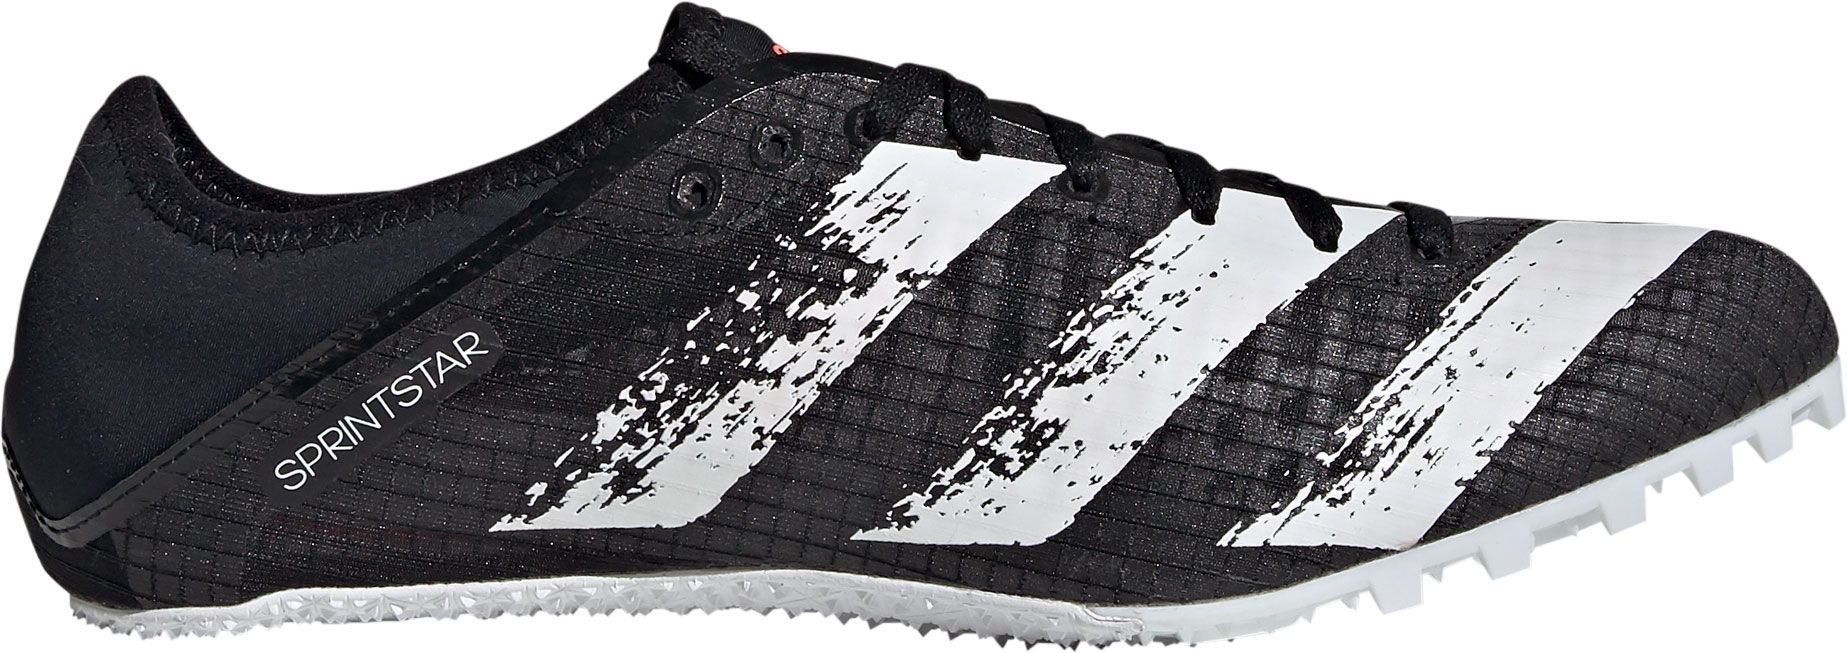 adidas men's sprintstar track and field shoes